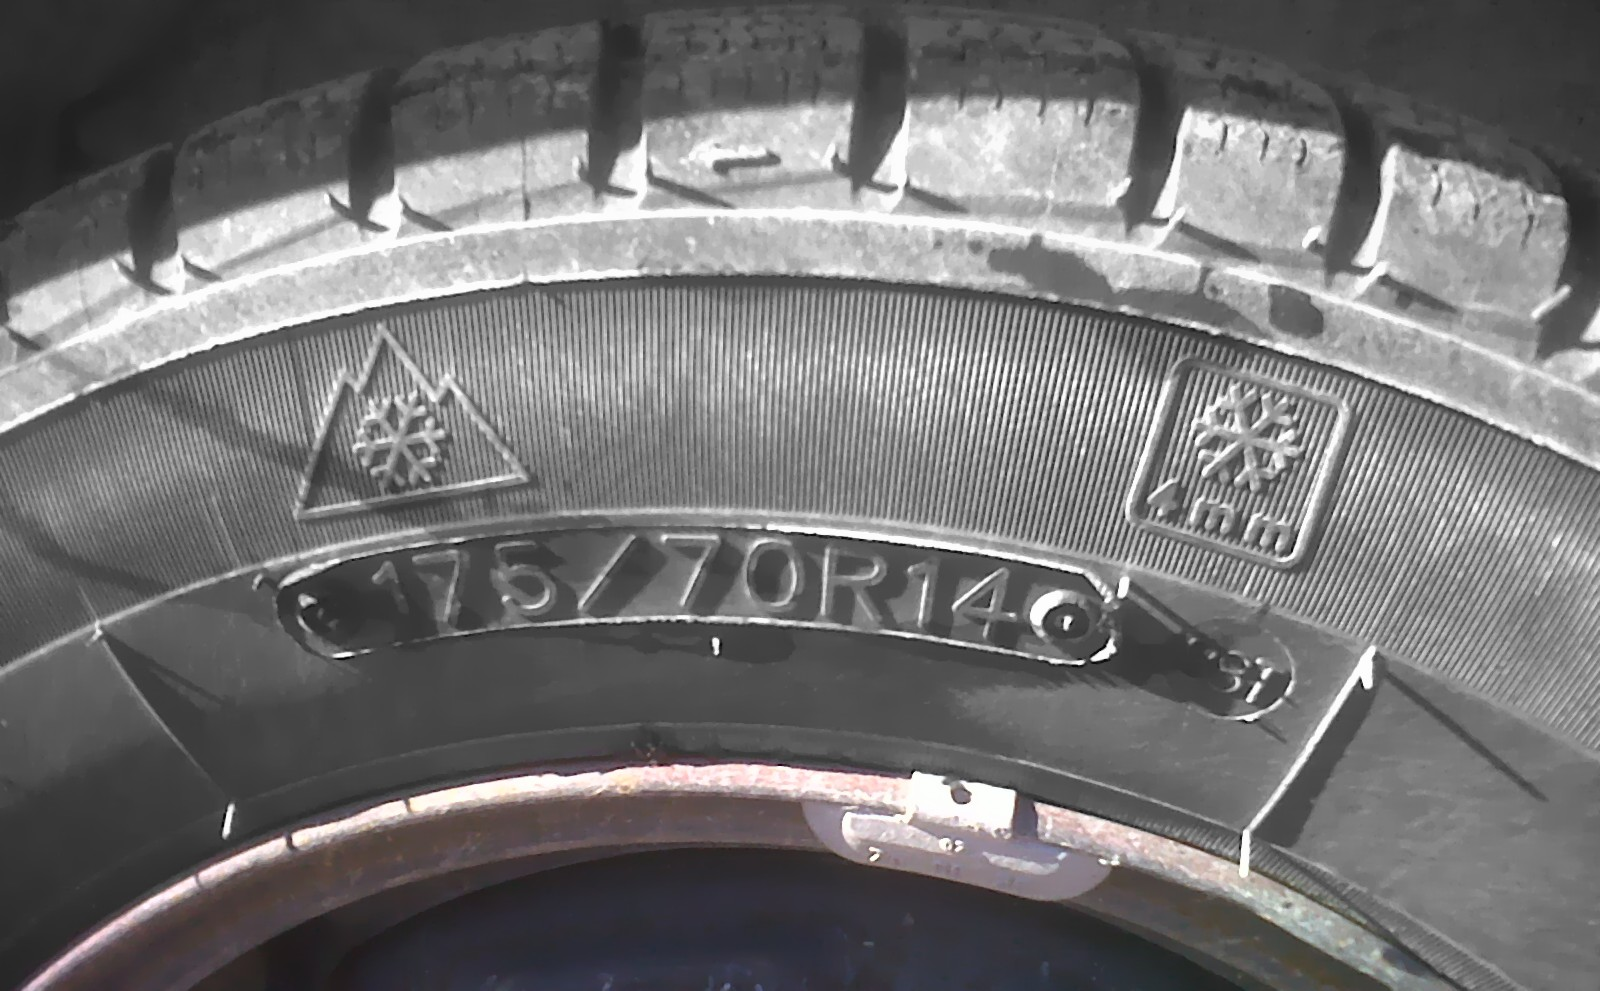 the 'Alpine' or 'Snowflake' symbol on a tire